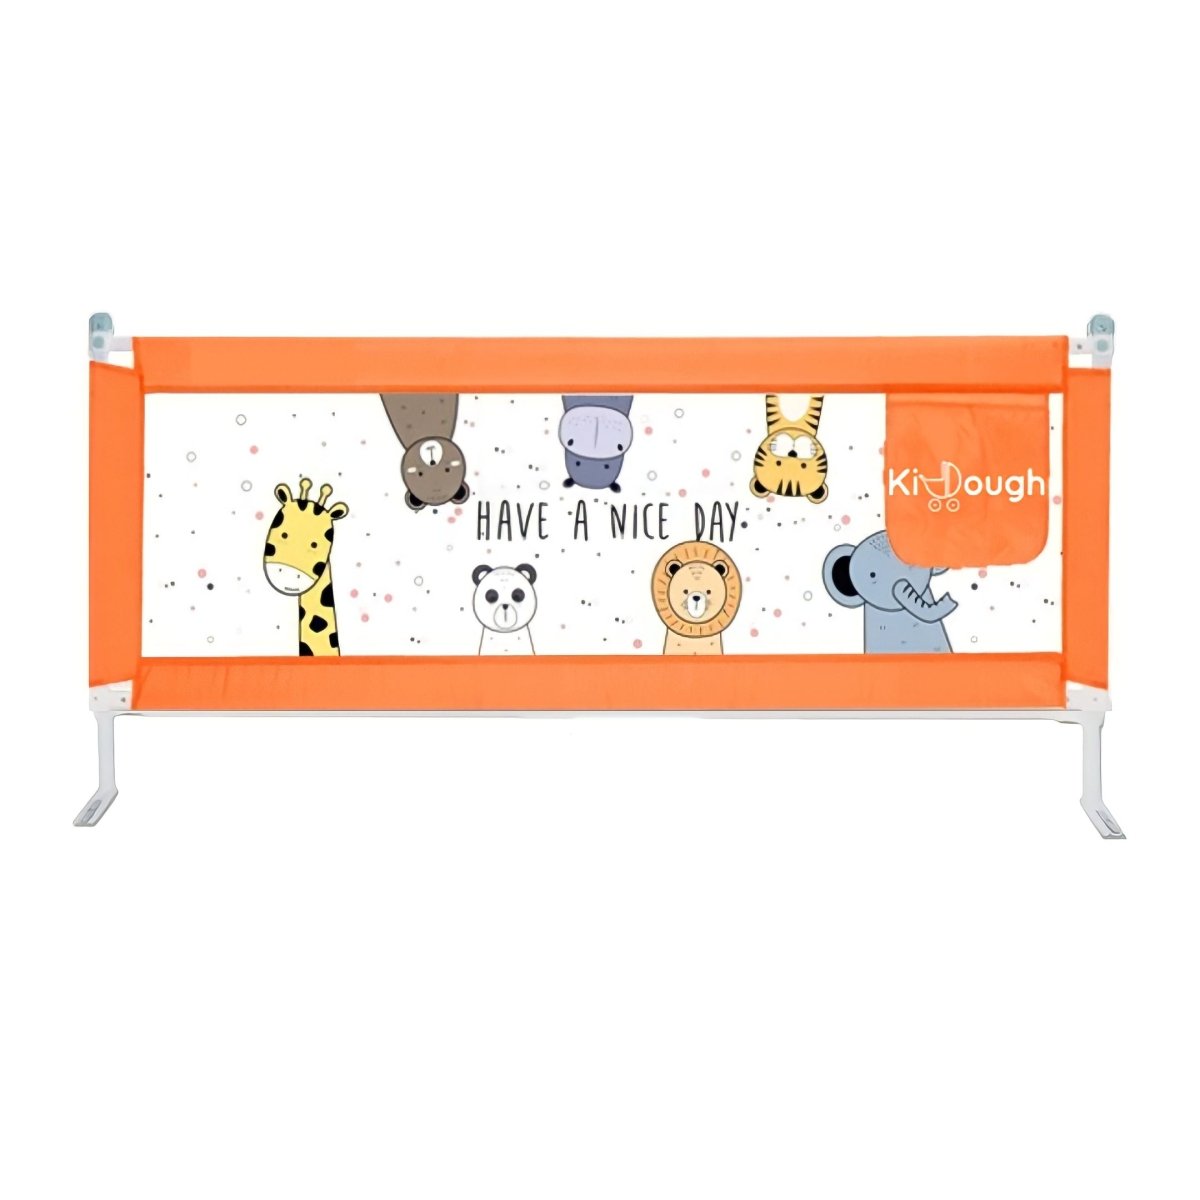 KidDough Adjustable Bed Rail Guard for Kids Safety- Grey - greyrail